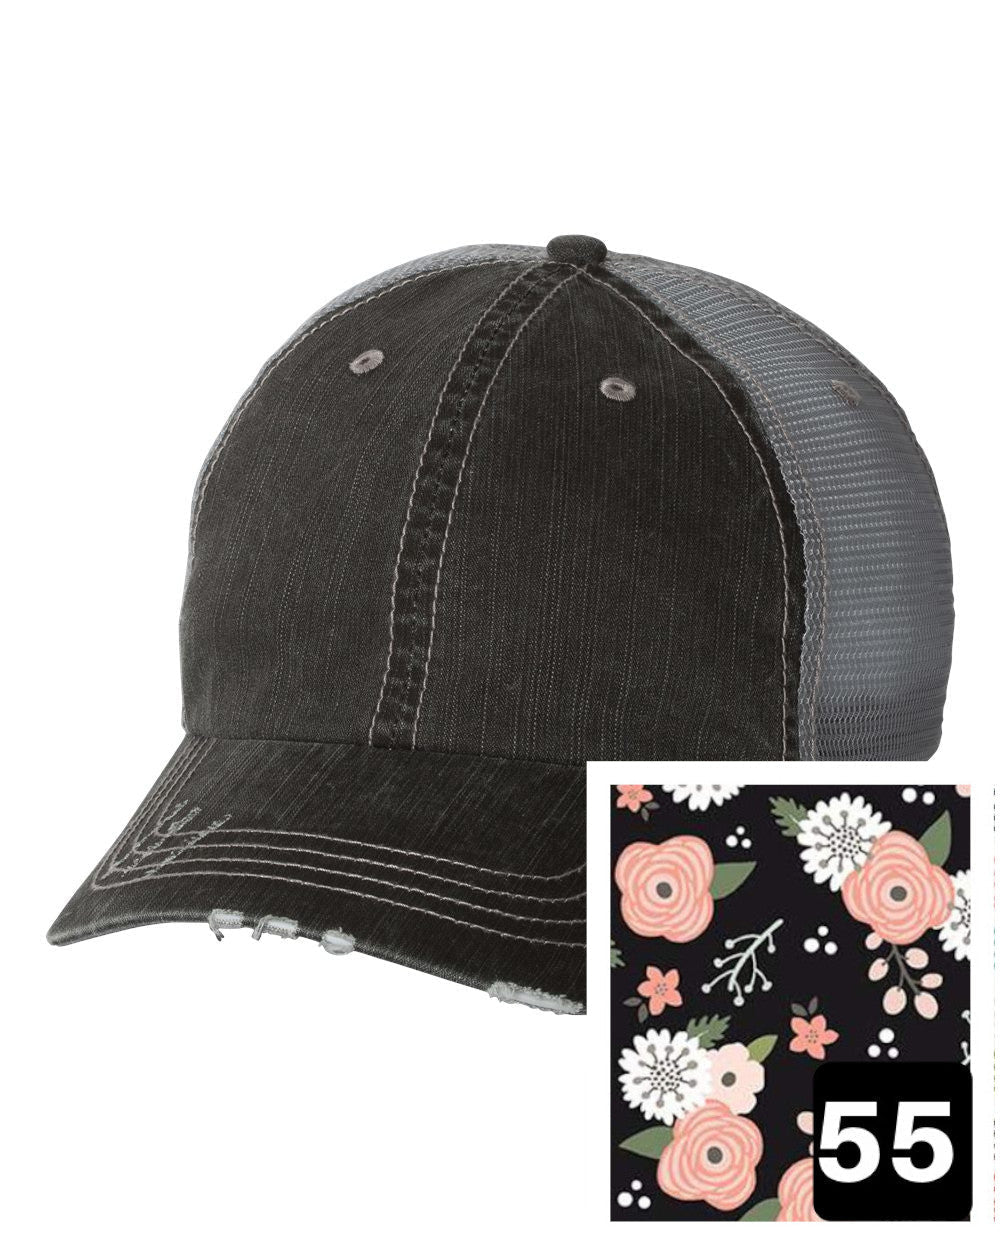 gray distressed trucker hat with petite floral on navy fabric state of Nebraska